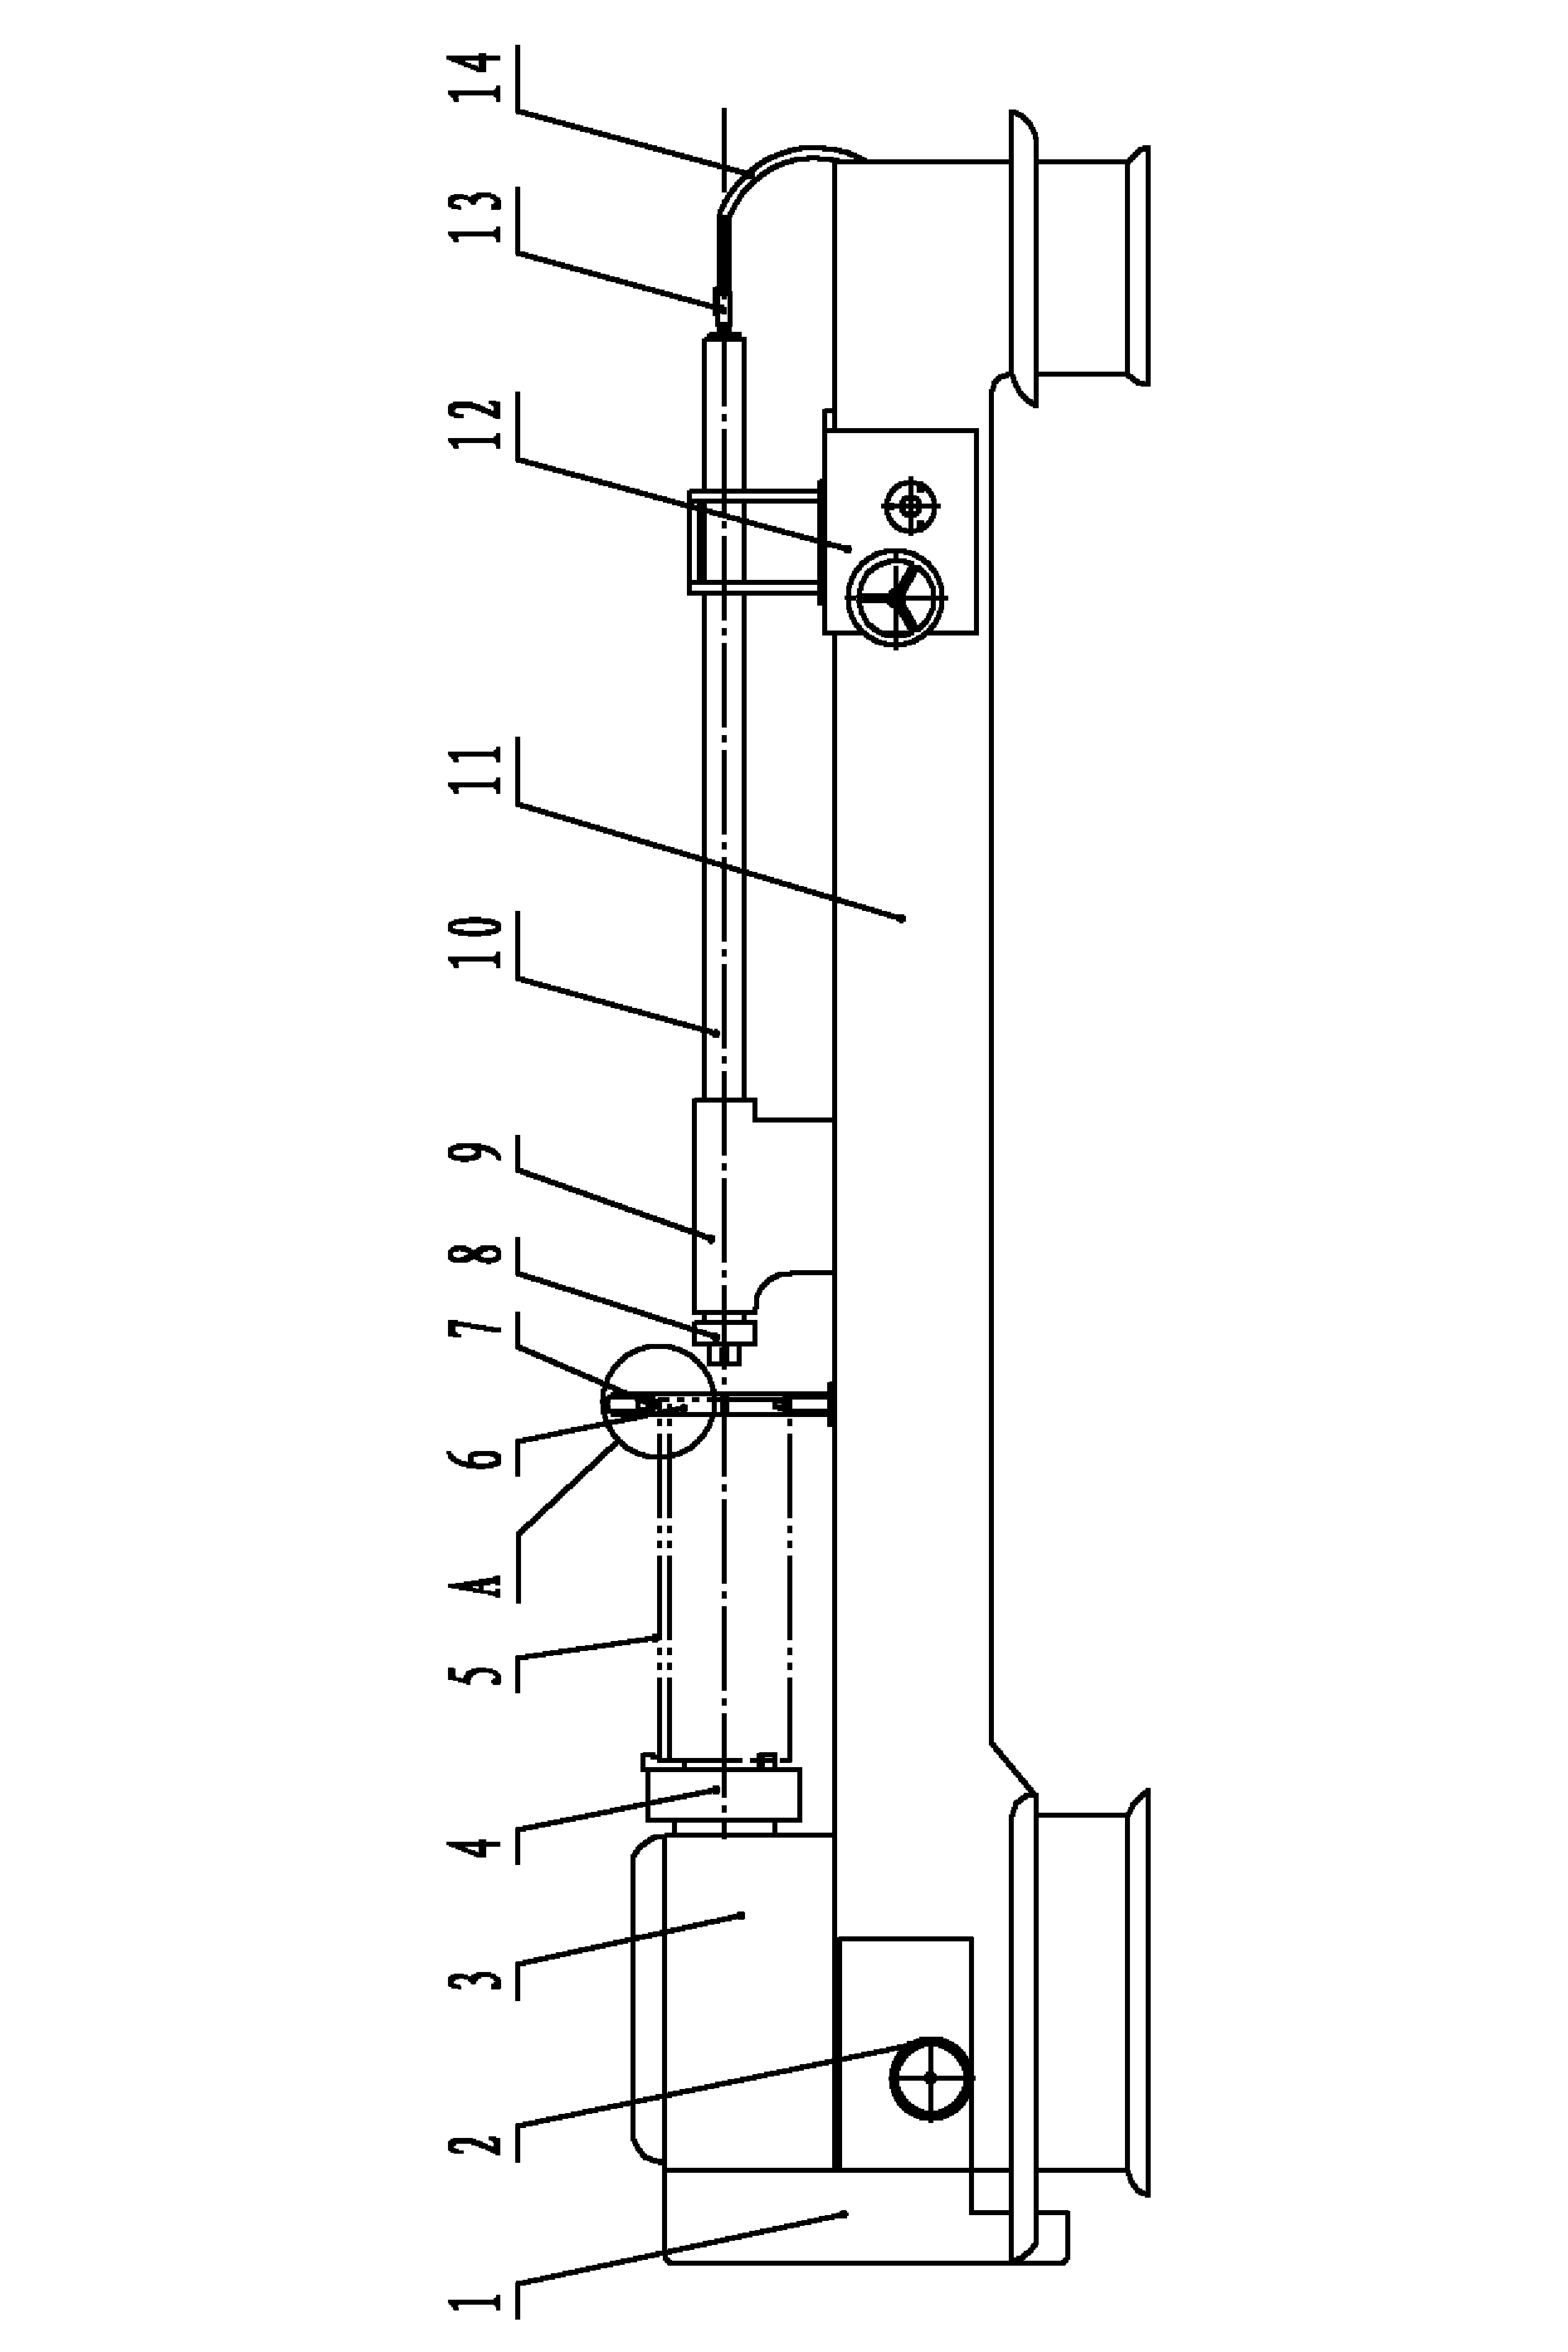 Processing method for inner hole of cylinder